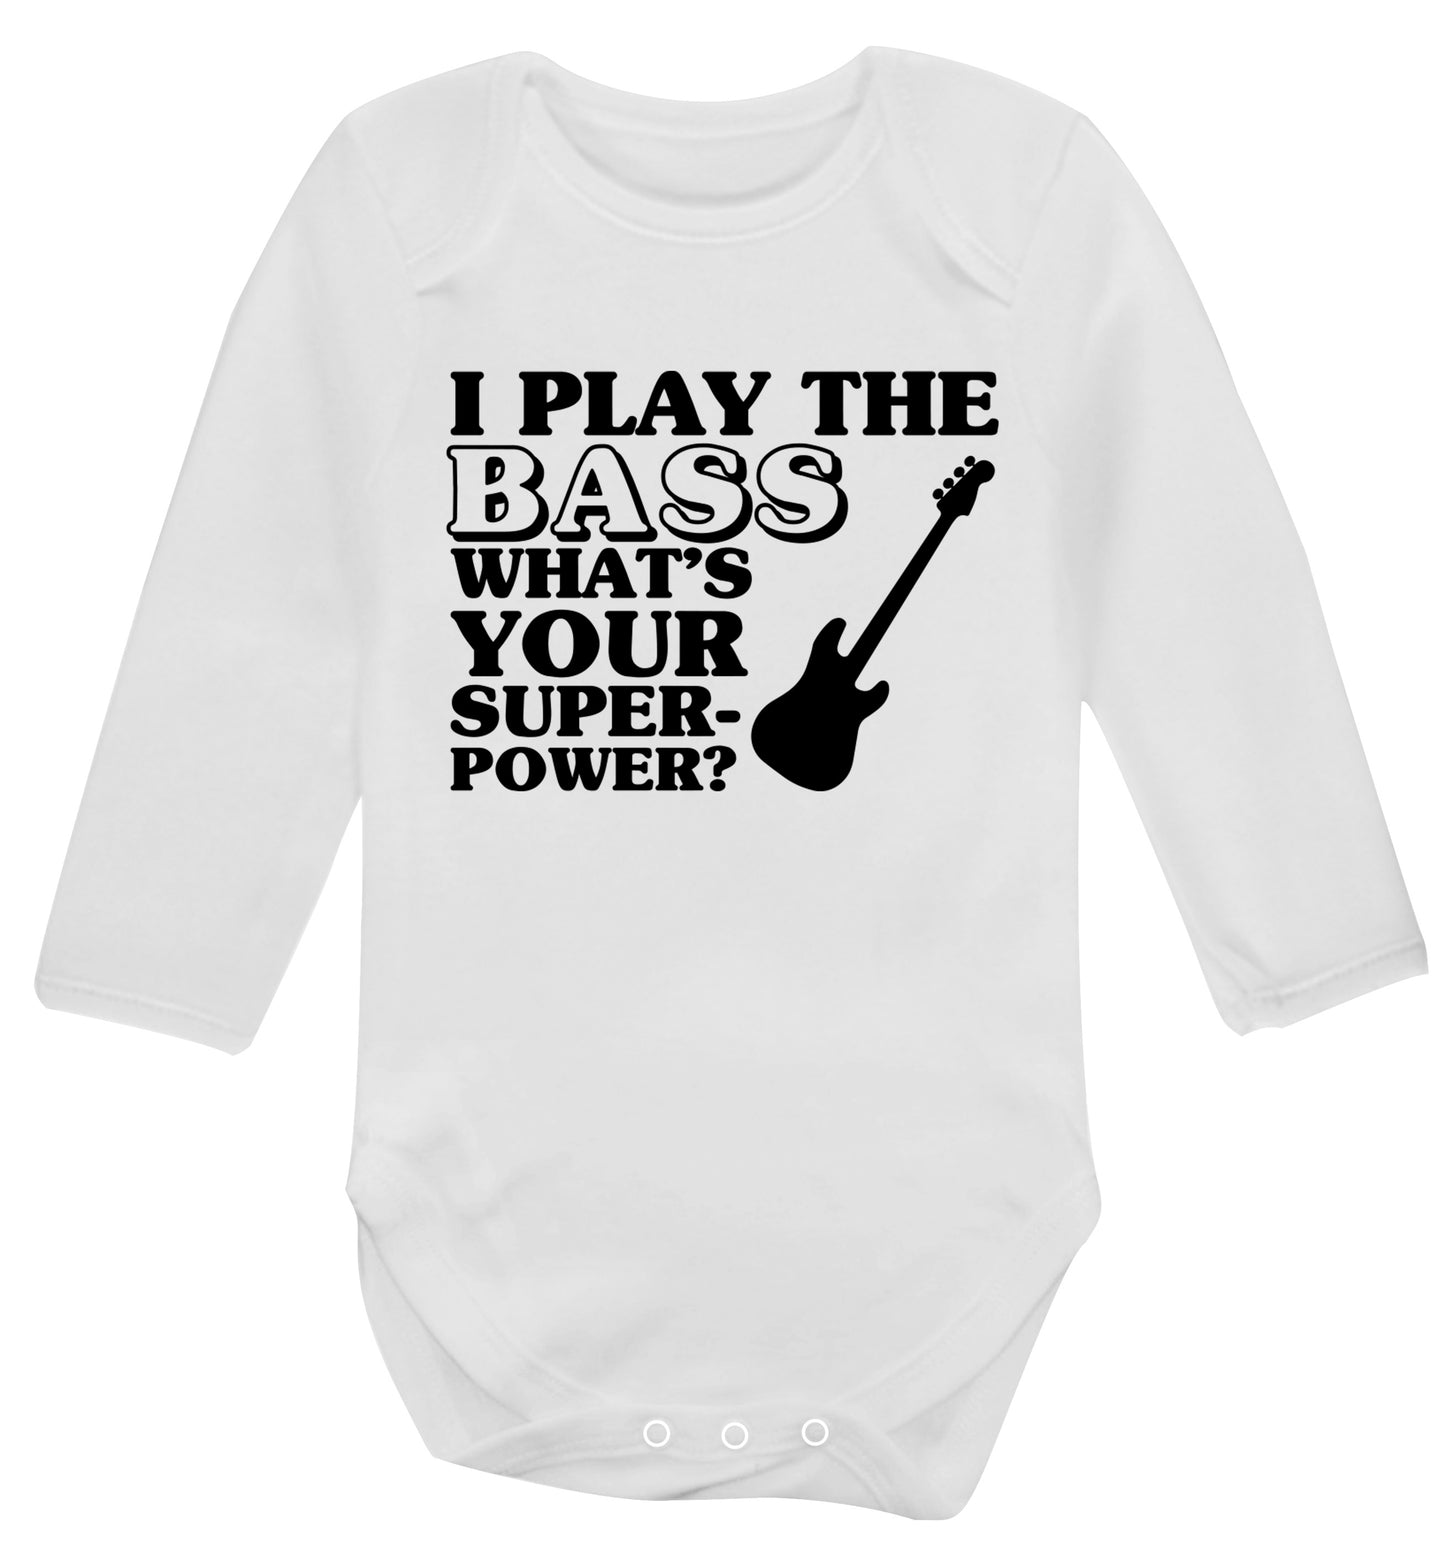 I play the bass what's your superpower? Baby Vest long sleeved white 6-12 months